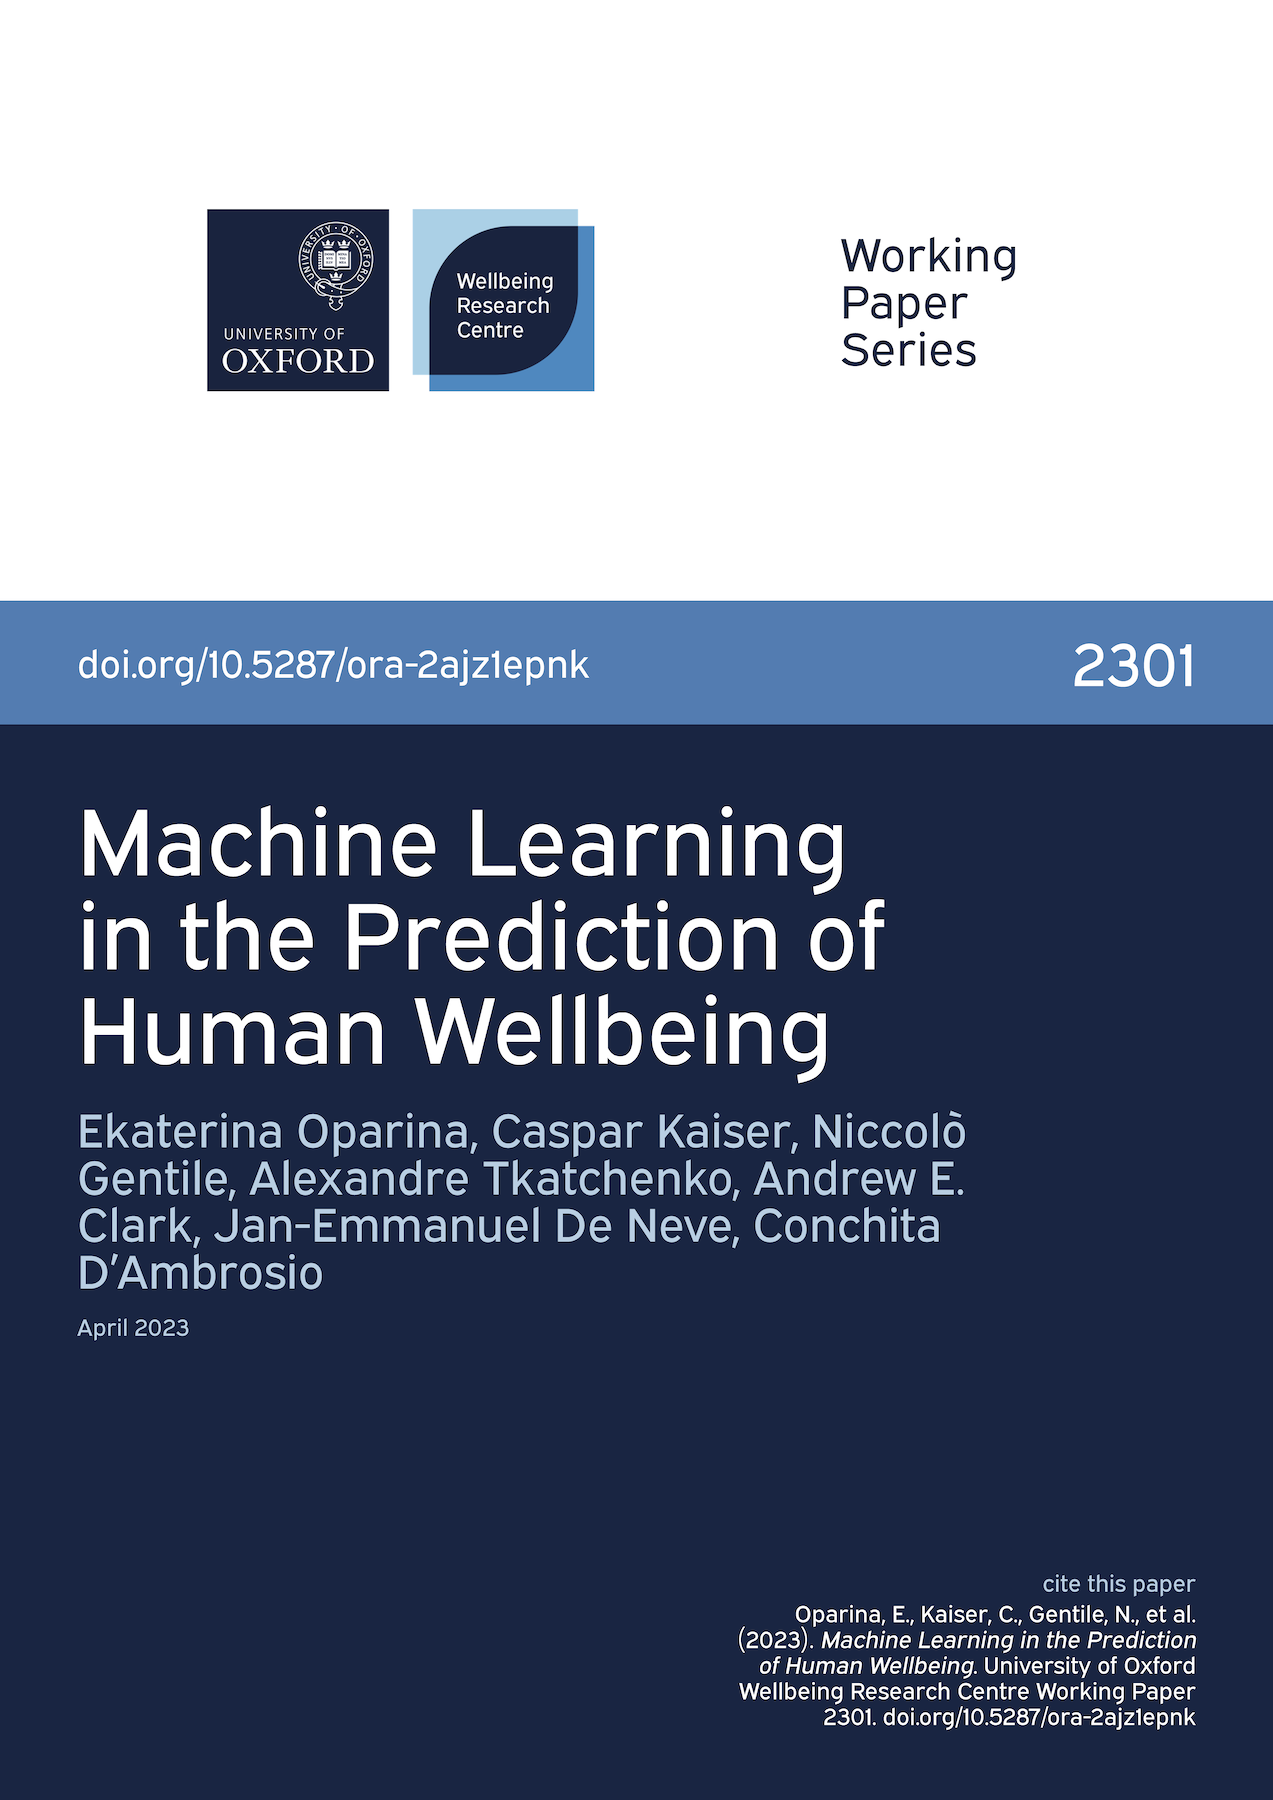 Cover for Working Paper 2301, Machine Learning in the Prediction of Human Wellbeing.